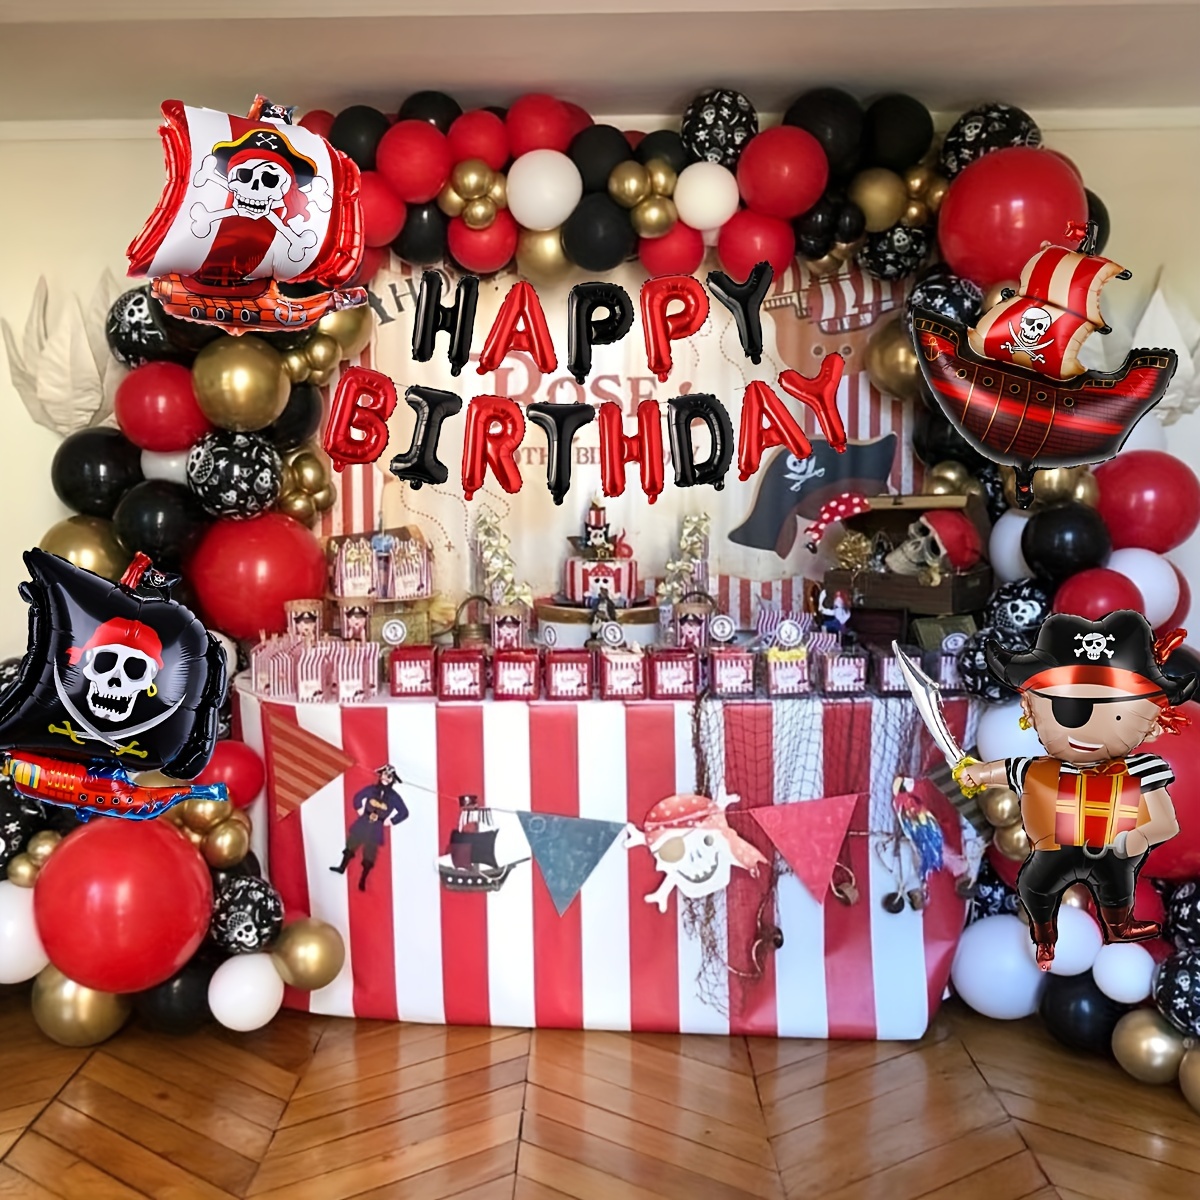 Pirate Themed Birthday Banner Party Decorations Pirate Birthday Balloon  Arch Accessories Pirate Ship Foil Polyester Film Balloons Used For Birthday Party  Decorations Comes With Straw Ribbon, Shop The Latest Trends